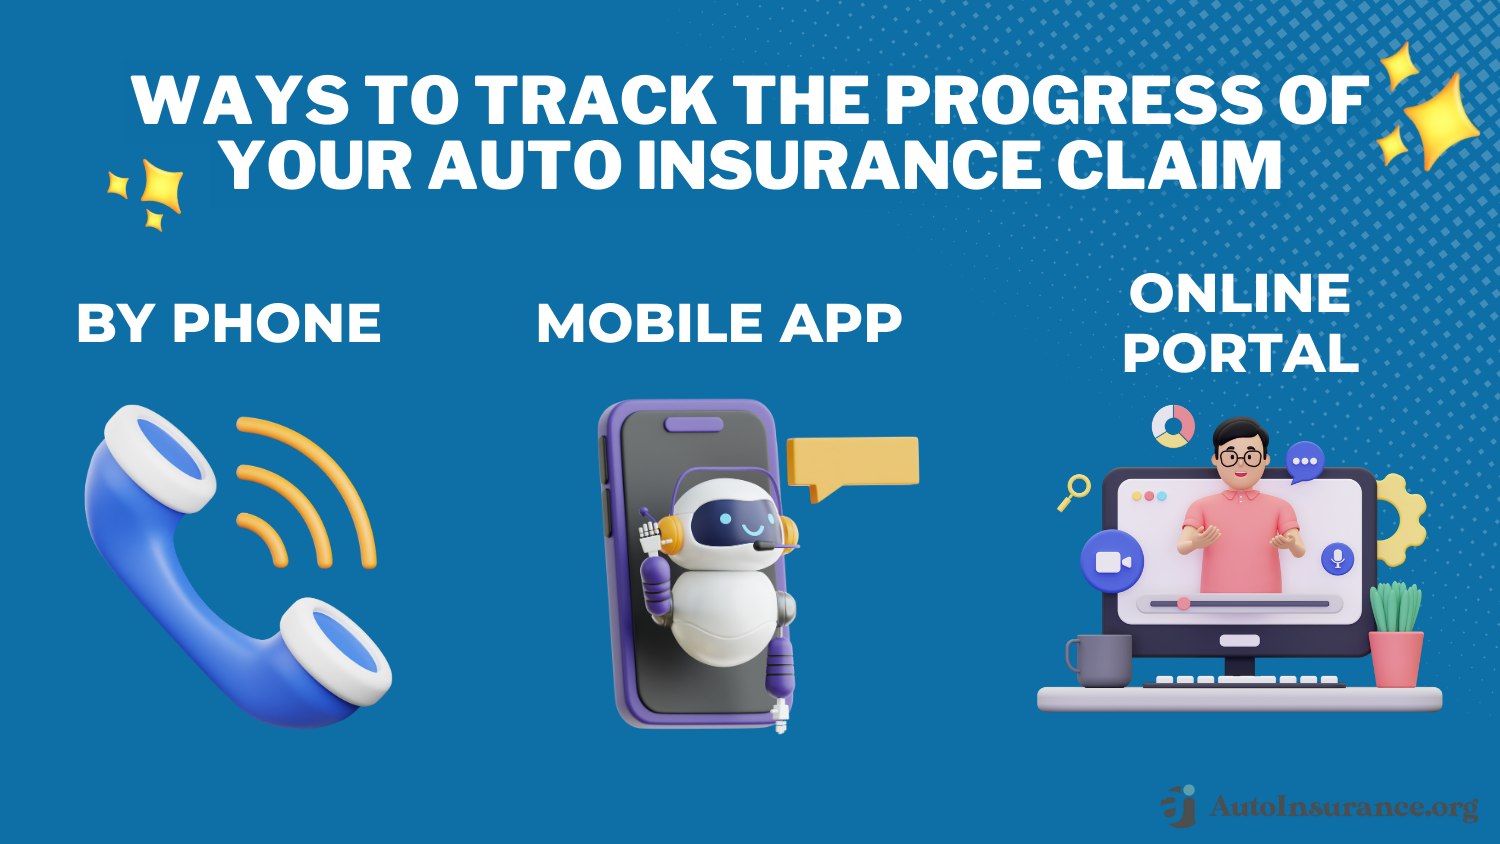 Collision Auto Insurance: Ways to Track the Progress of Your Auto Insurance Claim